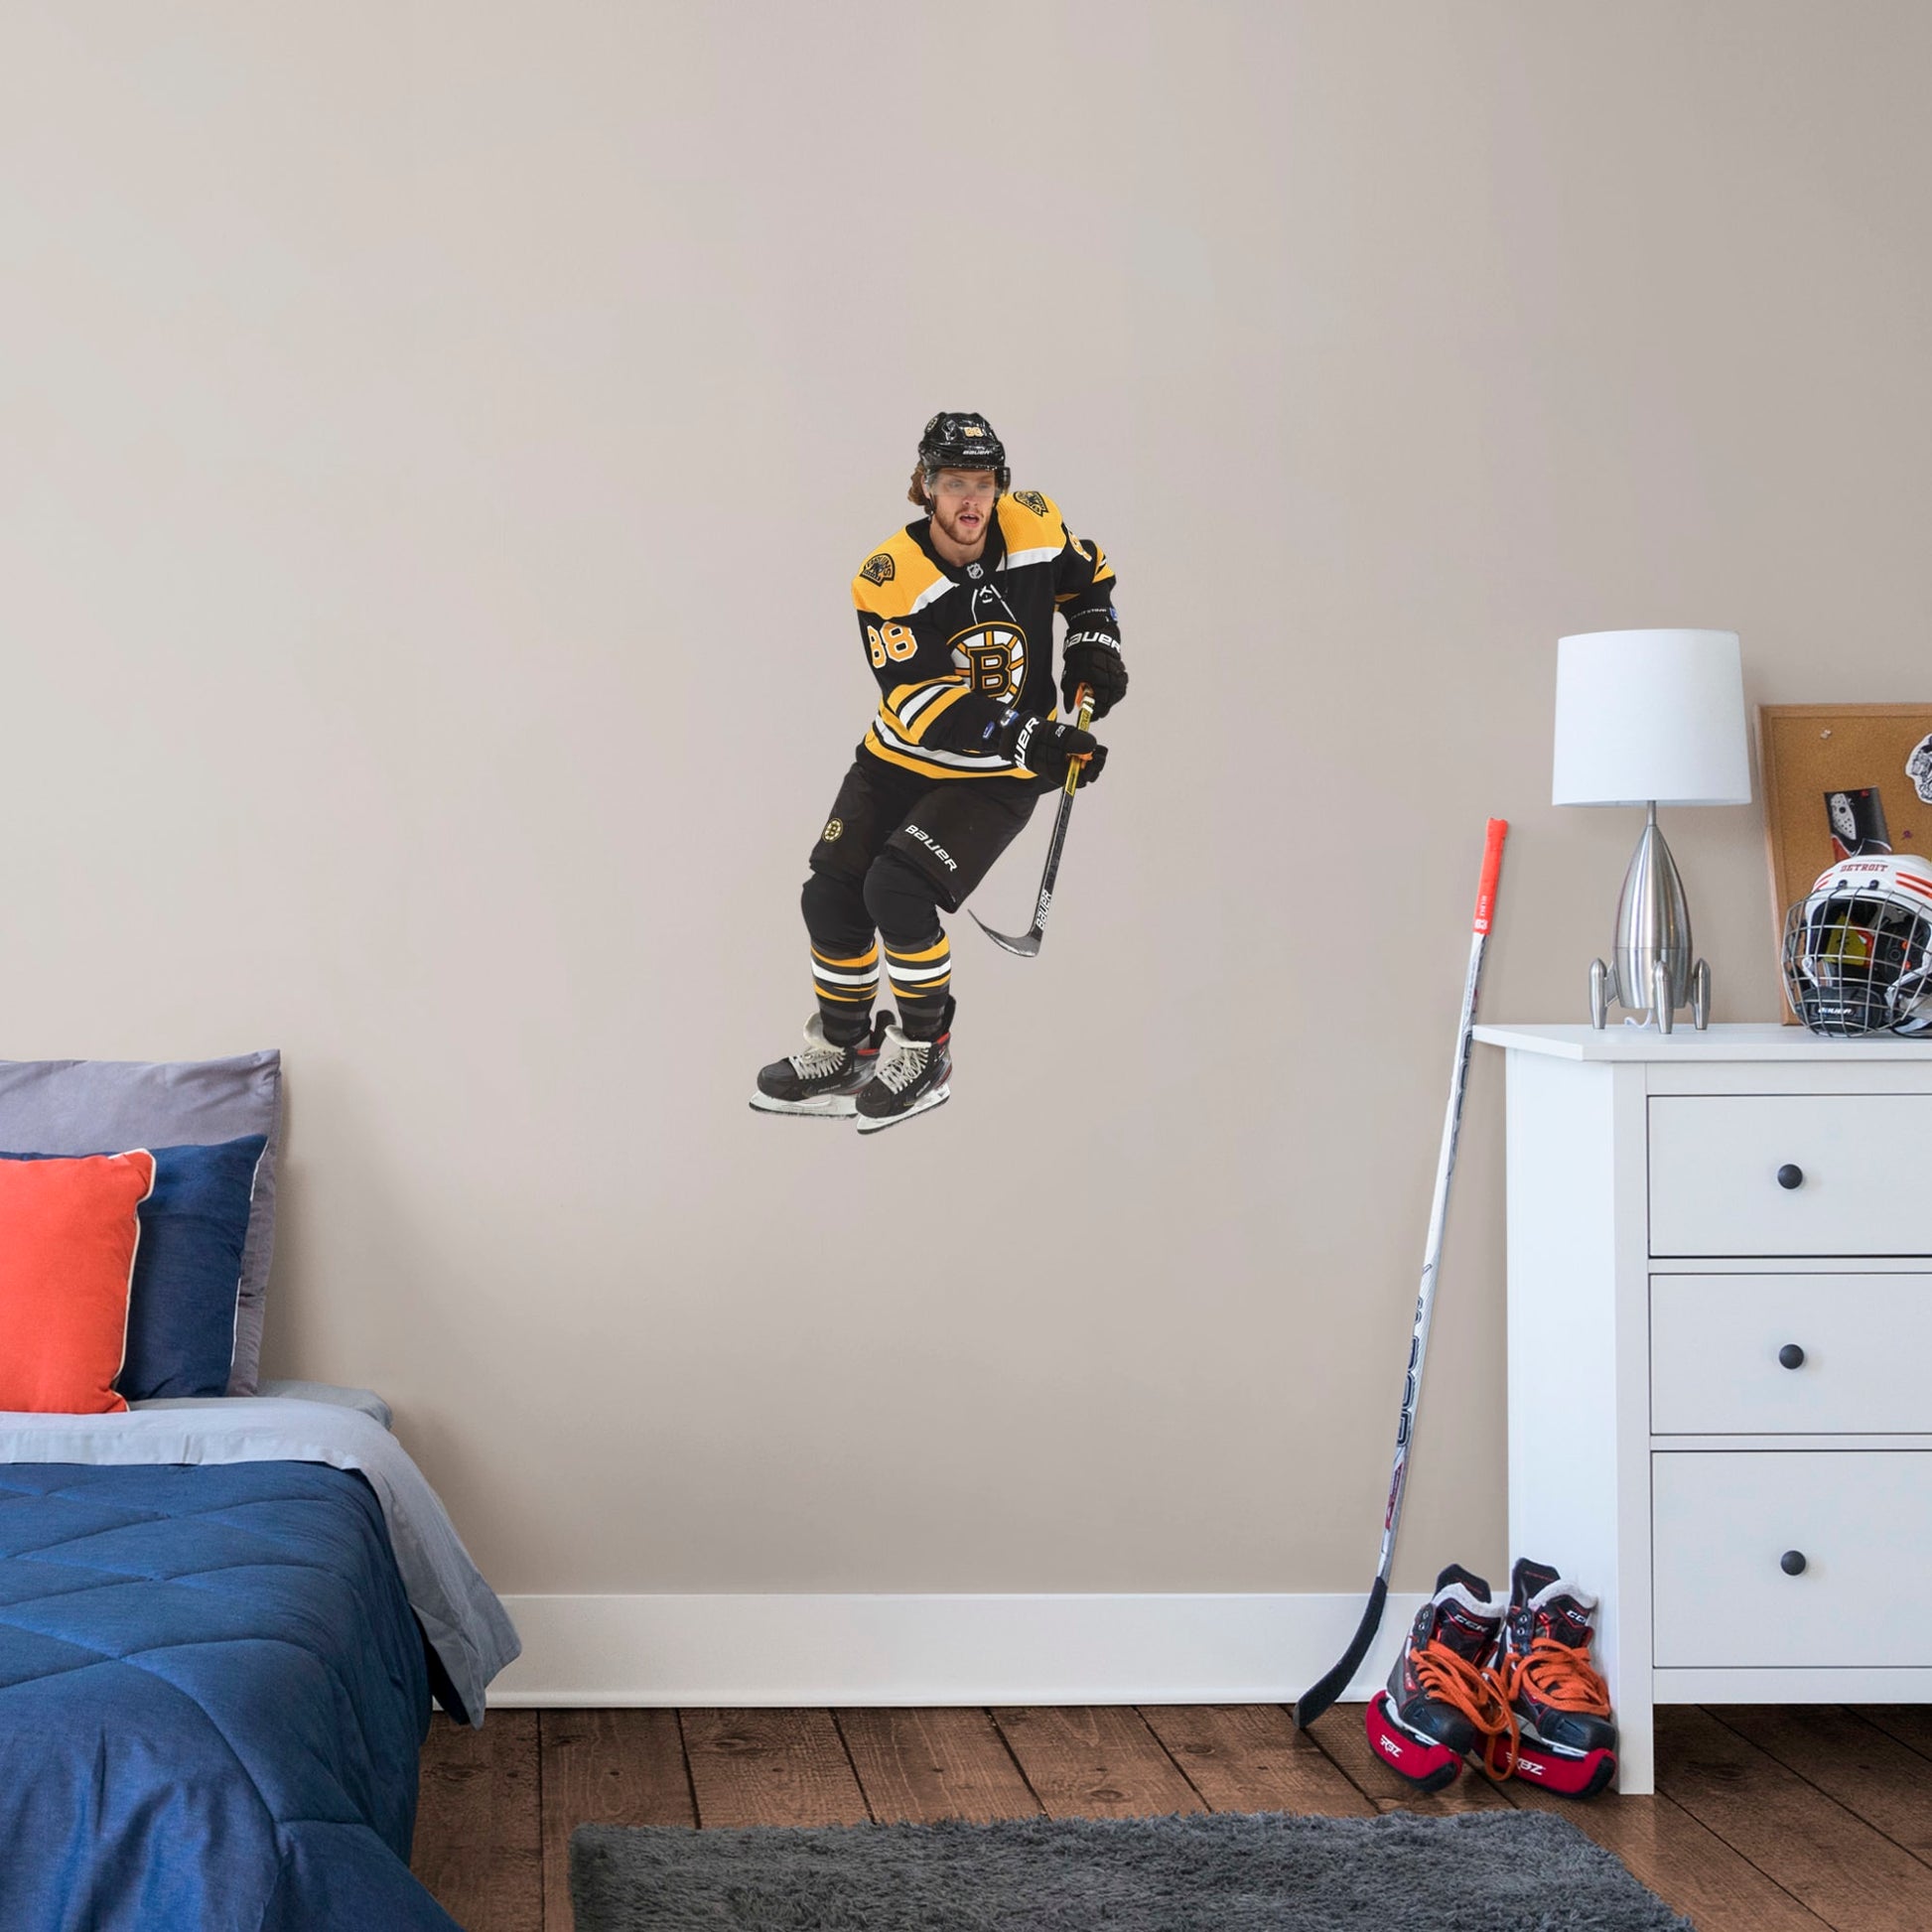 X-Large Athlete + 2 Decals (20"W x 38"H) He was the B's first-round pick in the 2014 NHL draft, and “Pasta” has since become one of the league’s most prolific scorers. Bring the action into the game room, living room or locker room with this officially licensed NHL wall decal featuring Boston Bruins player David Pastrnak poised to skate into action.